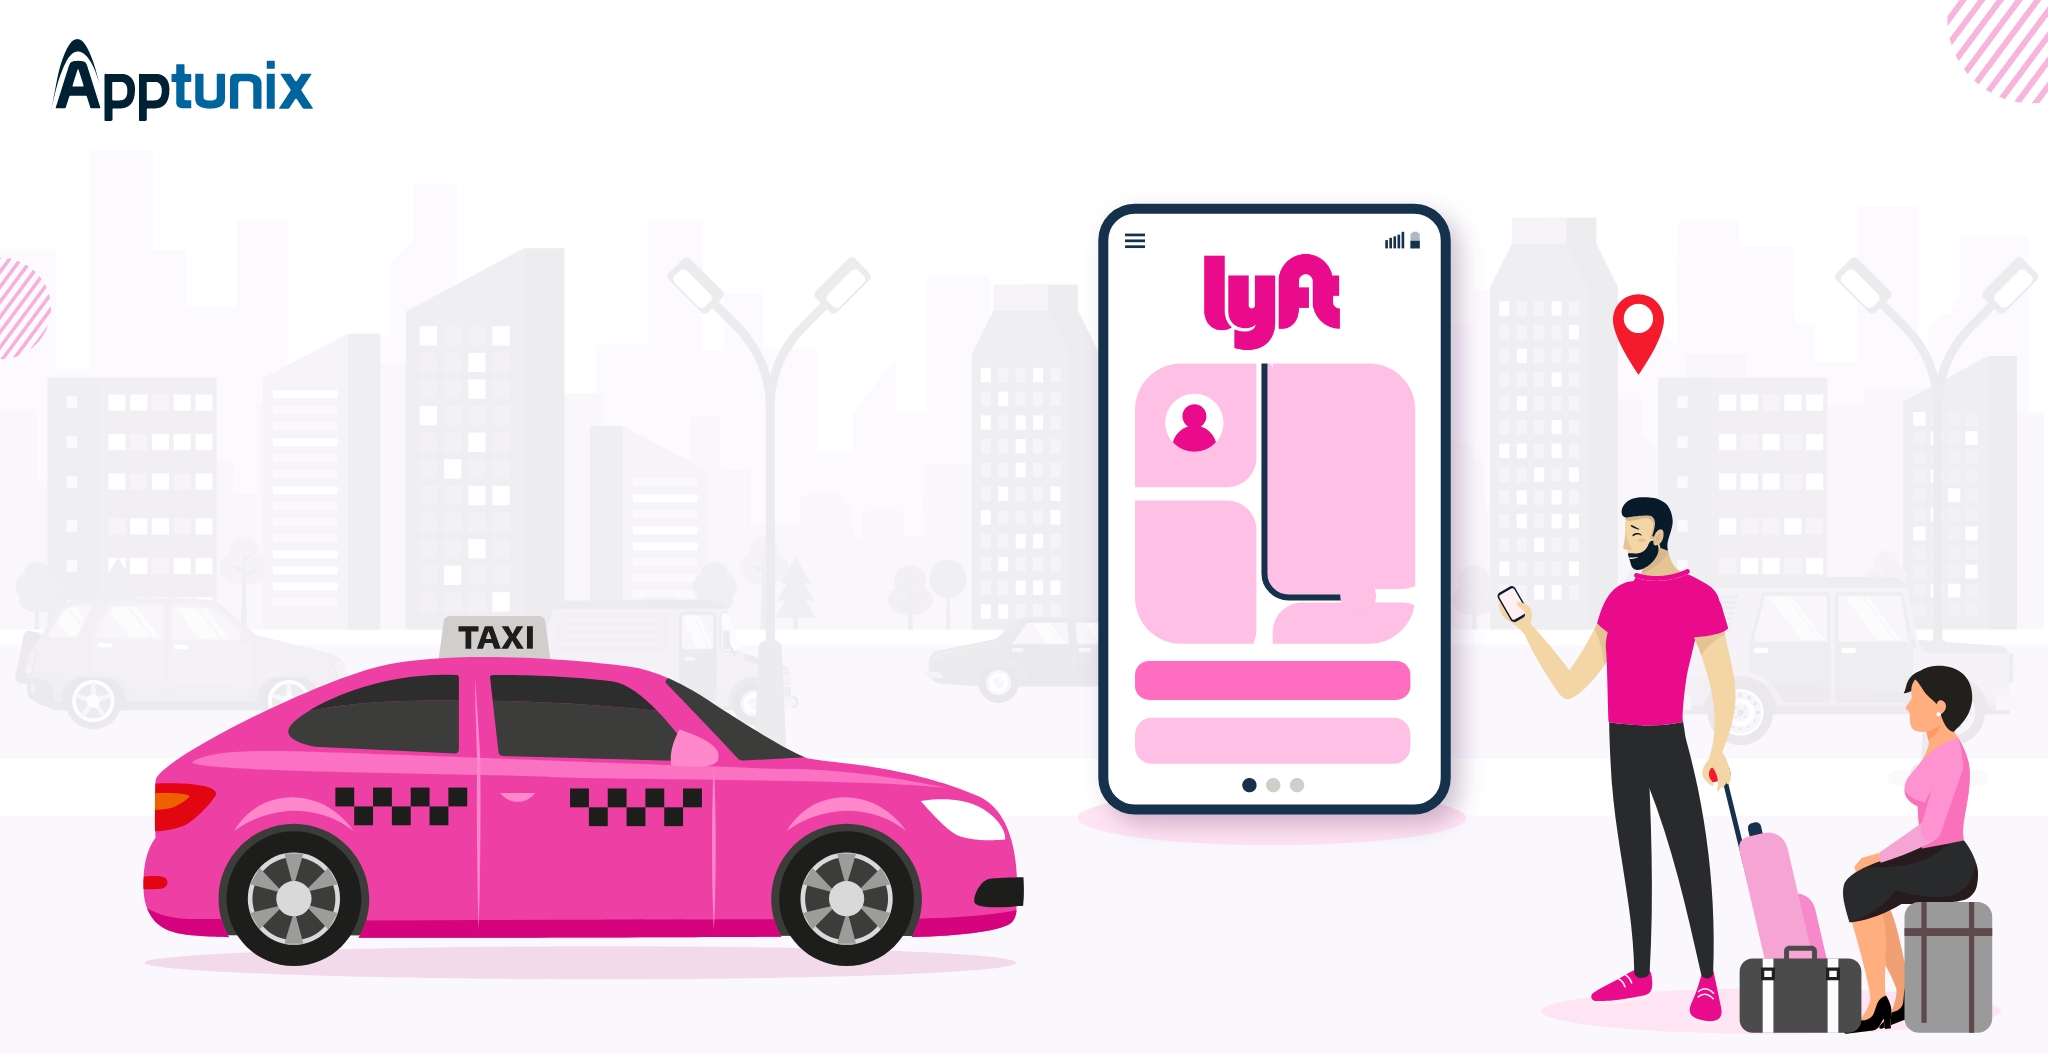 Lyft Appoints New CEO as Ride-Hailing Firm Faces Increasing Pressure